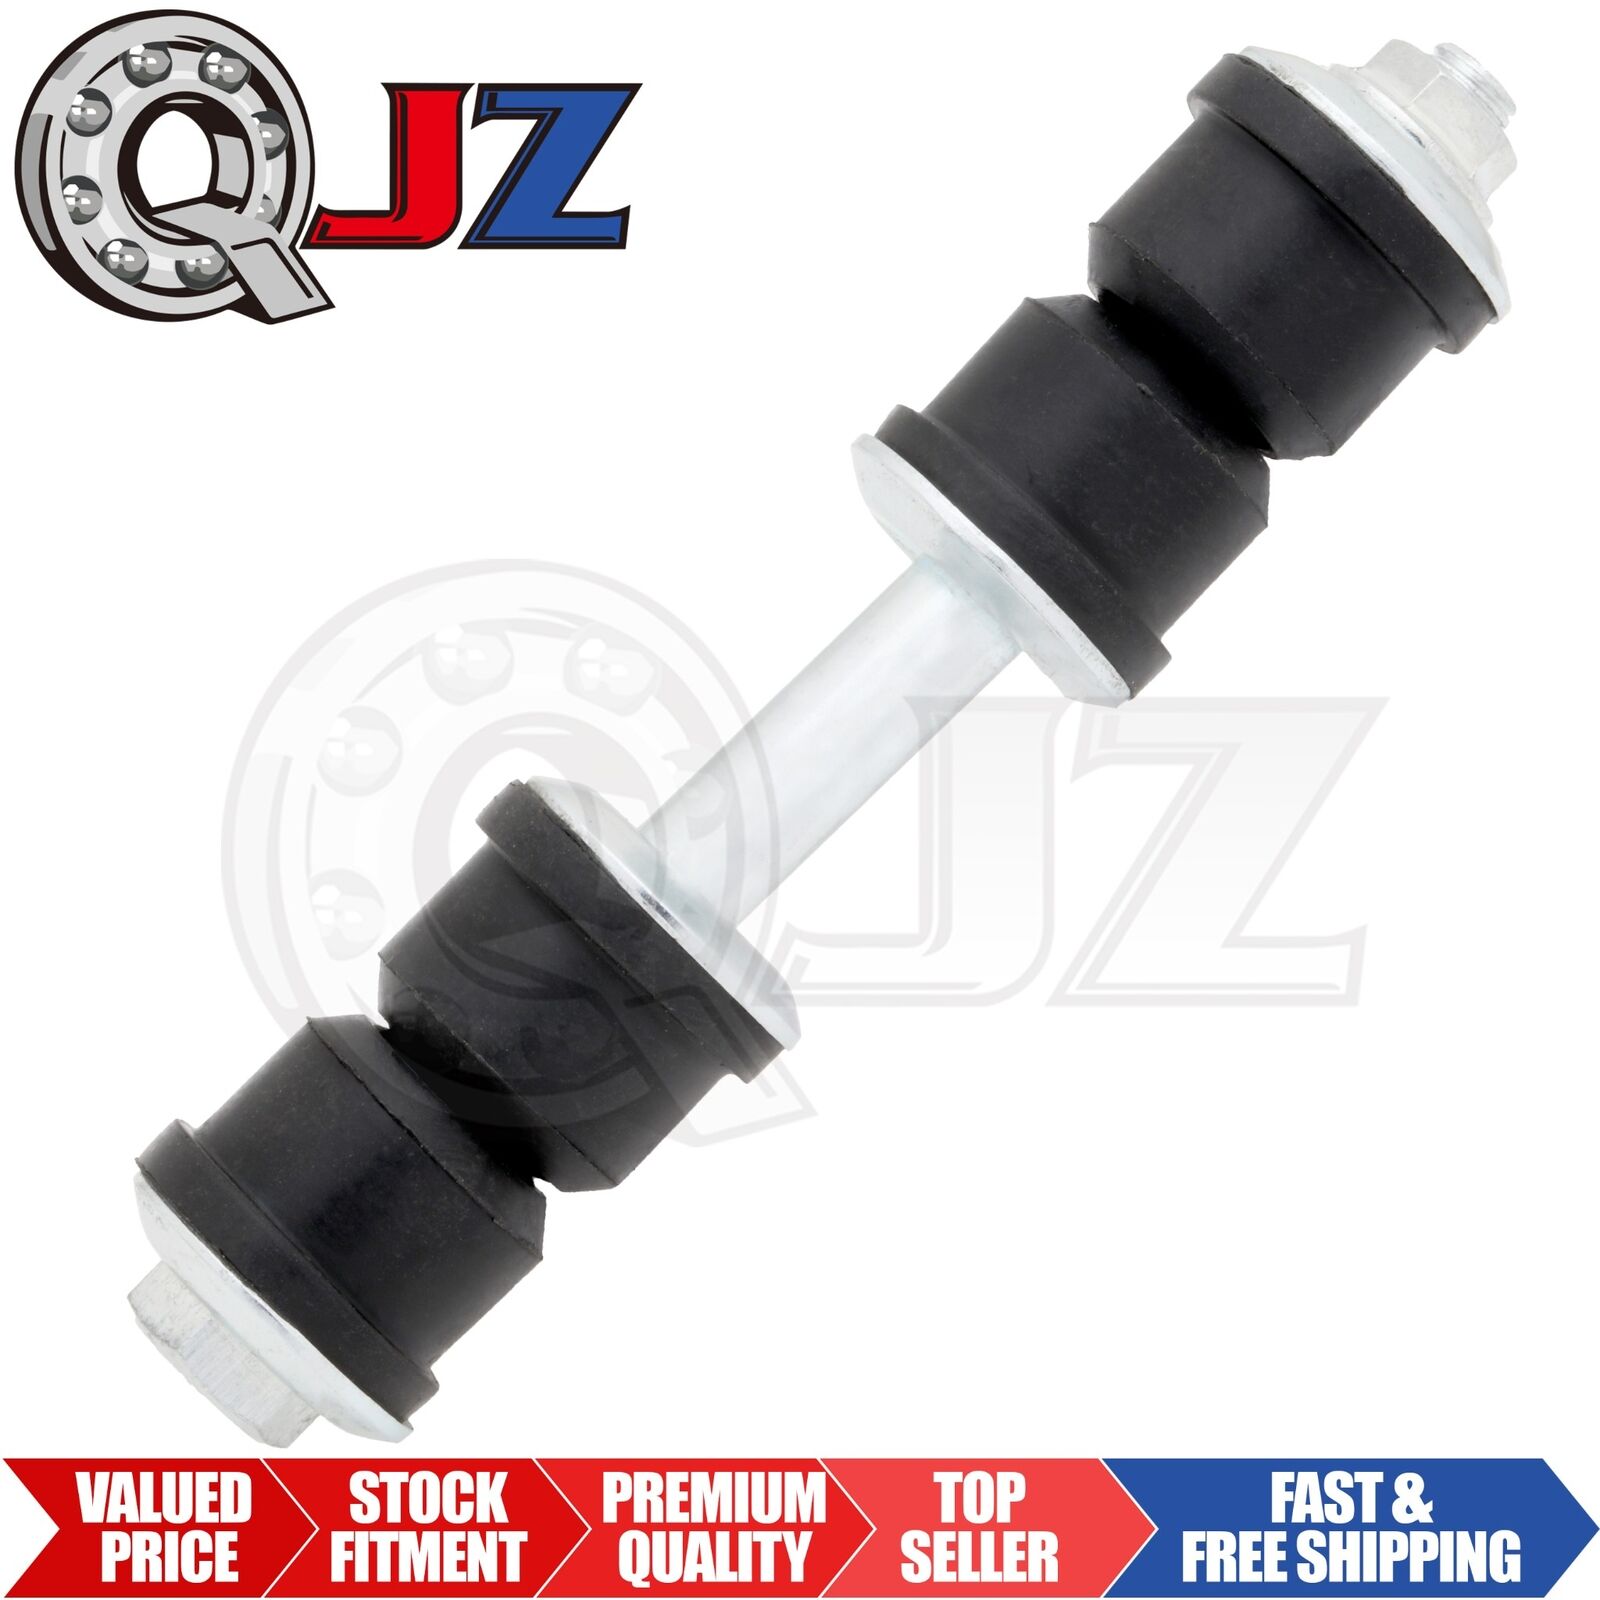 [FRONT(Qty.1)] X5255 K5255 Stabilizer Bar Link Kit For 1975-1980 Mercury Monarch